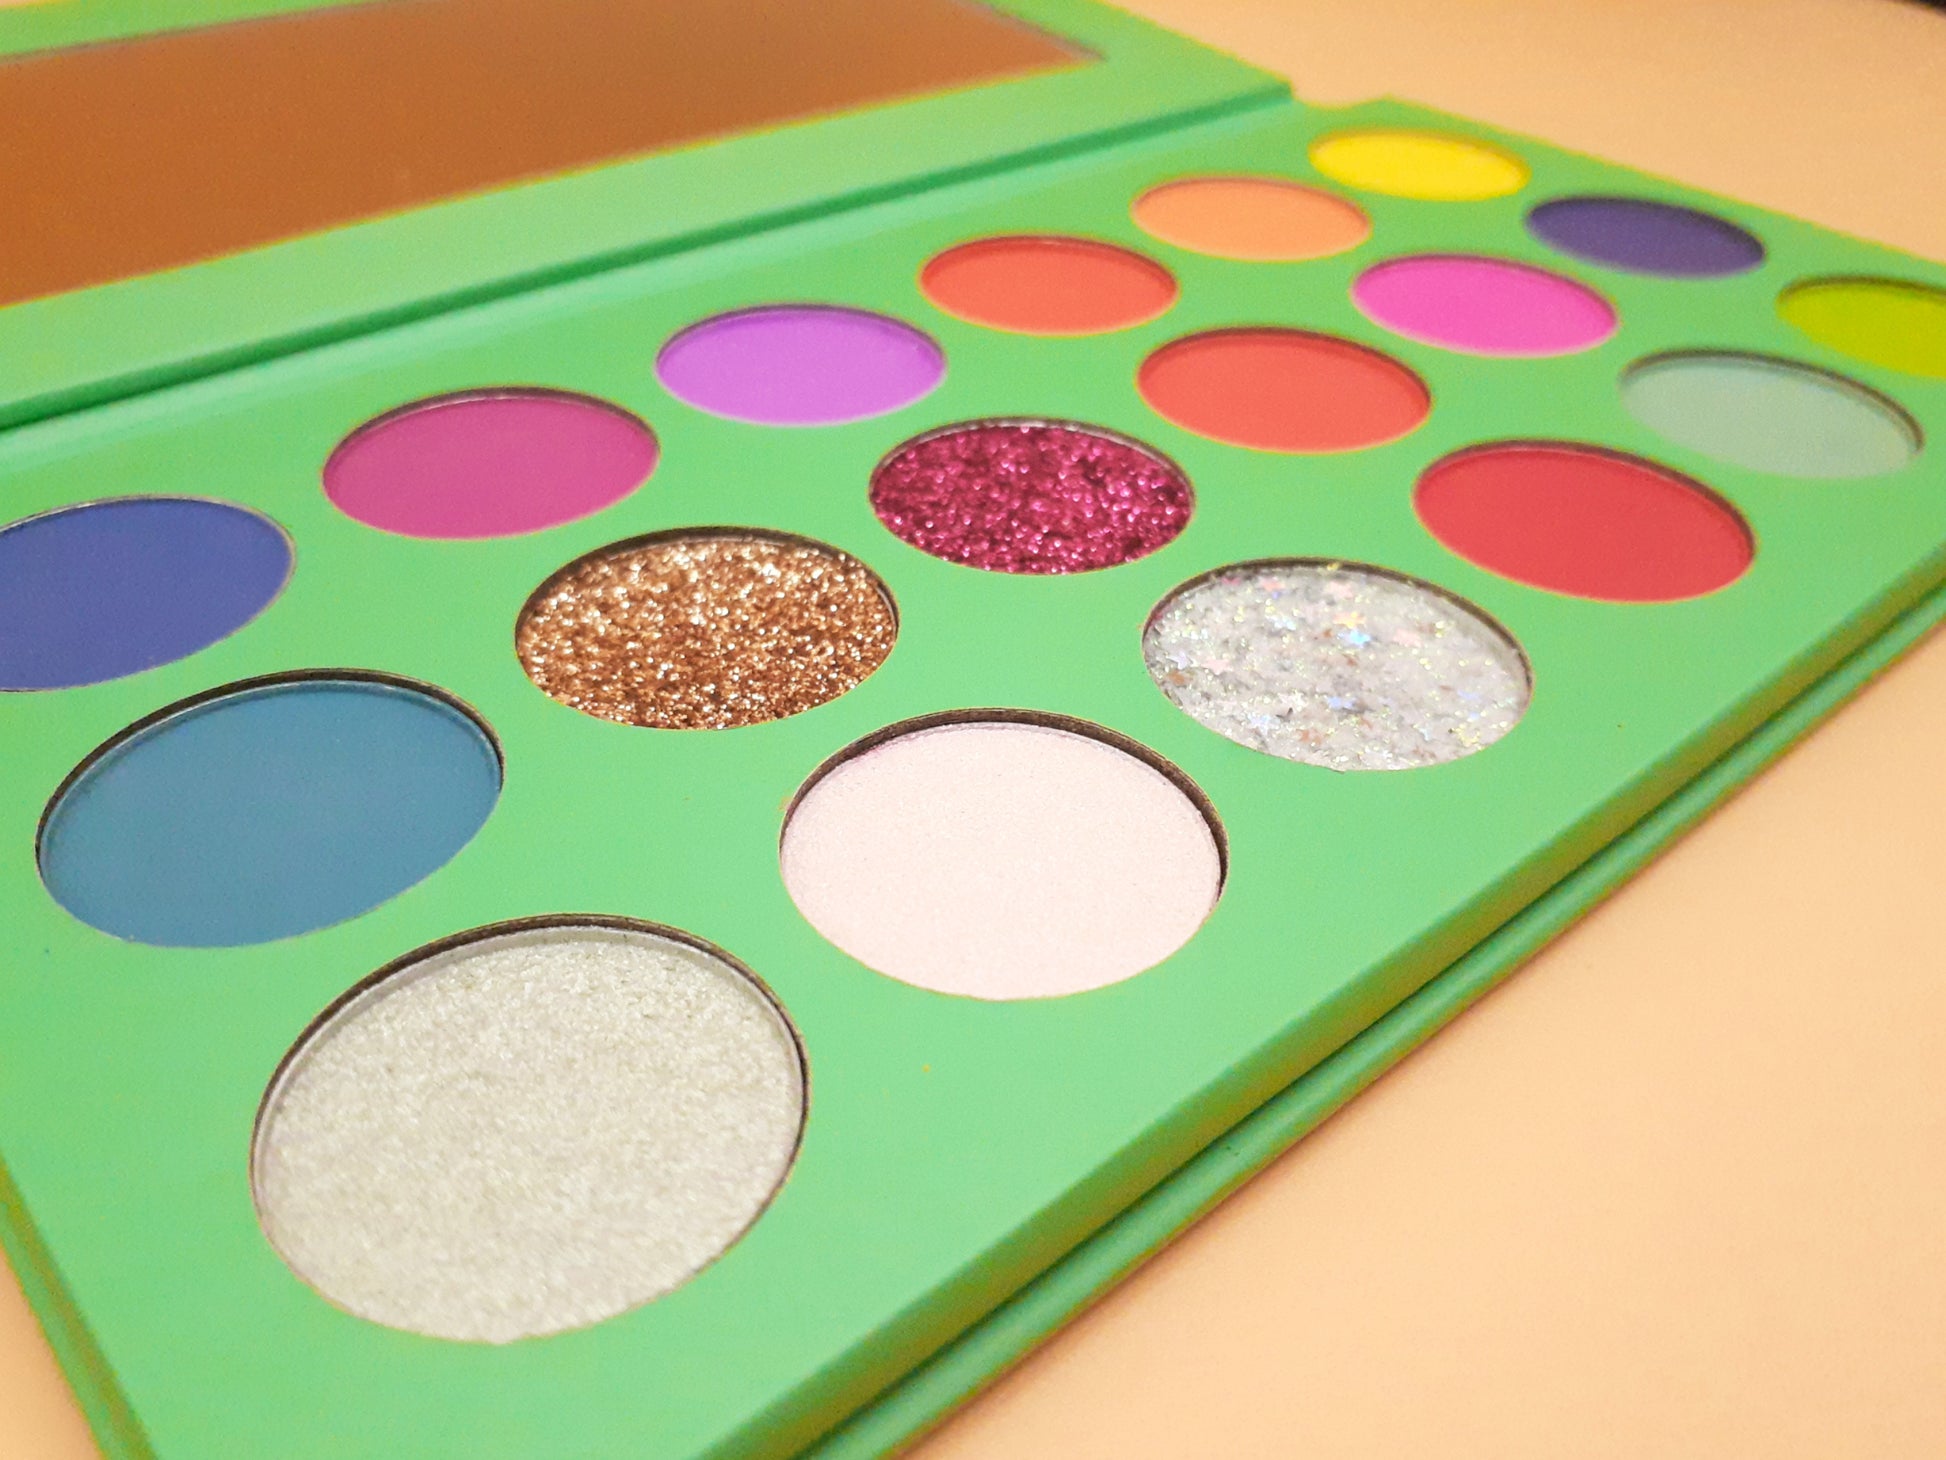 a close up view of the palette reveals the texture in the glitter pans. A mirror inside the palette is visible in the top of the photo.